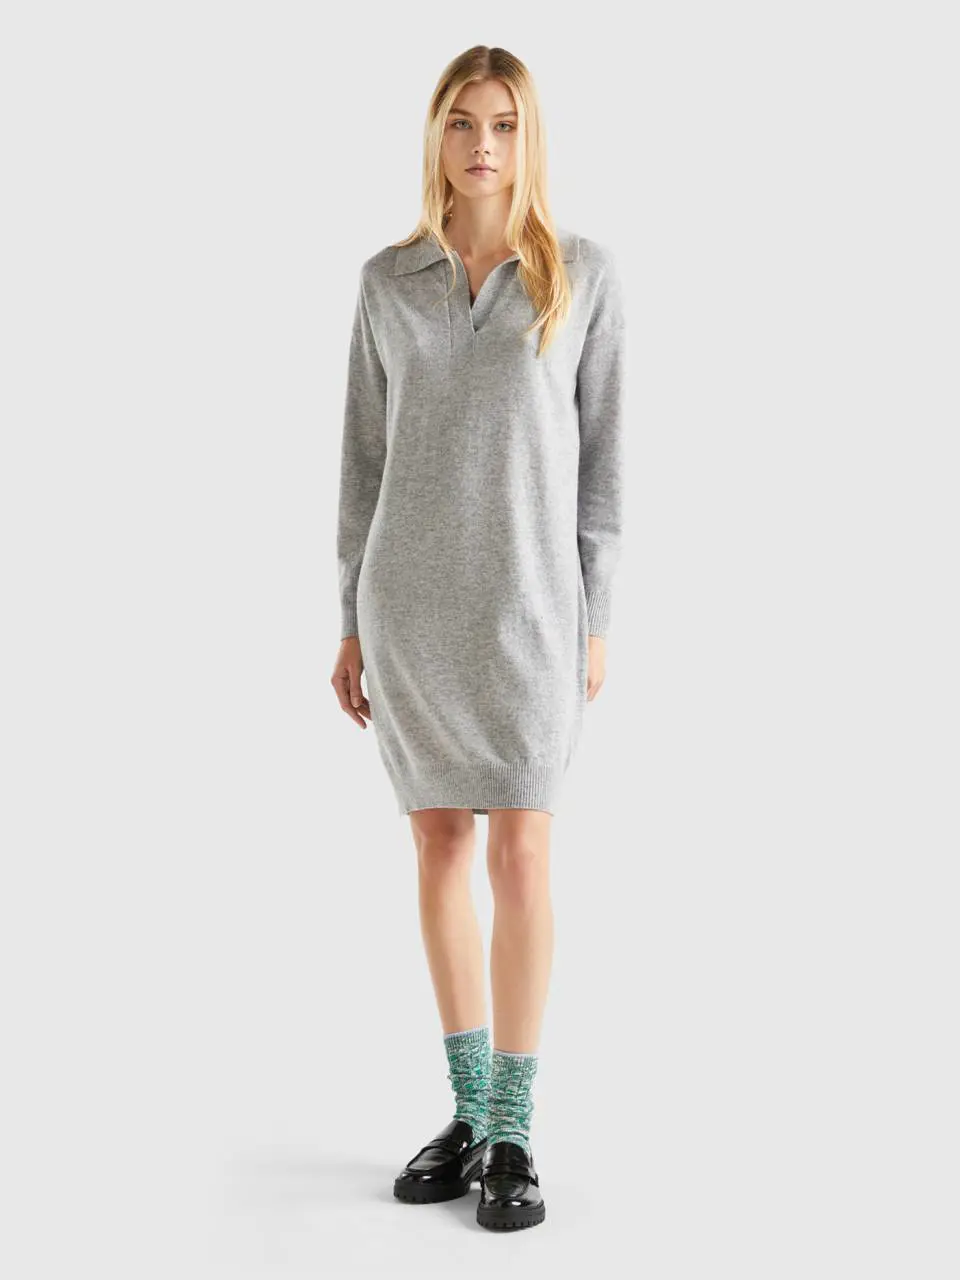 Benetton knit dress with collar. 1